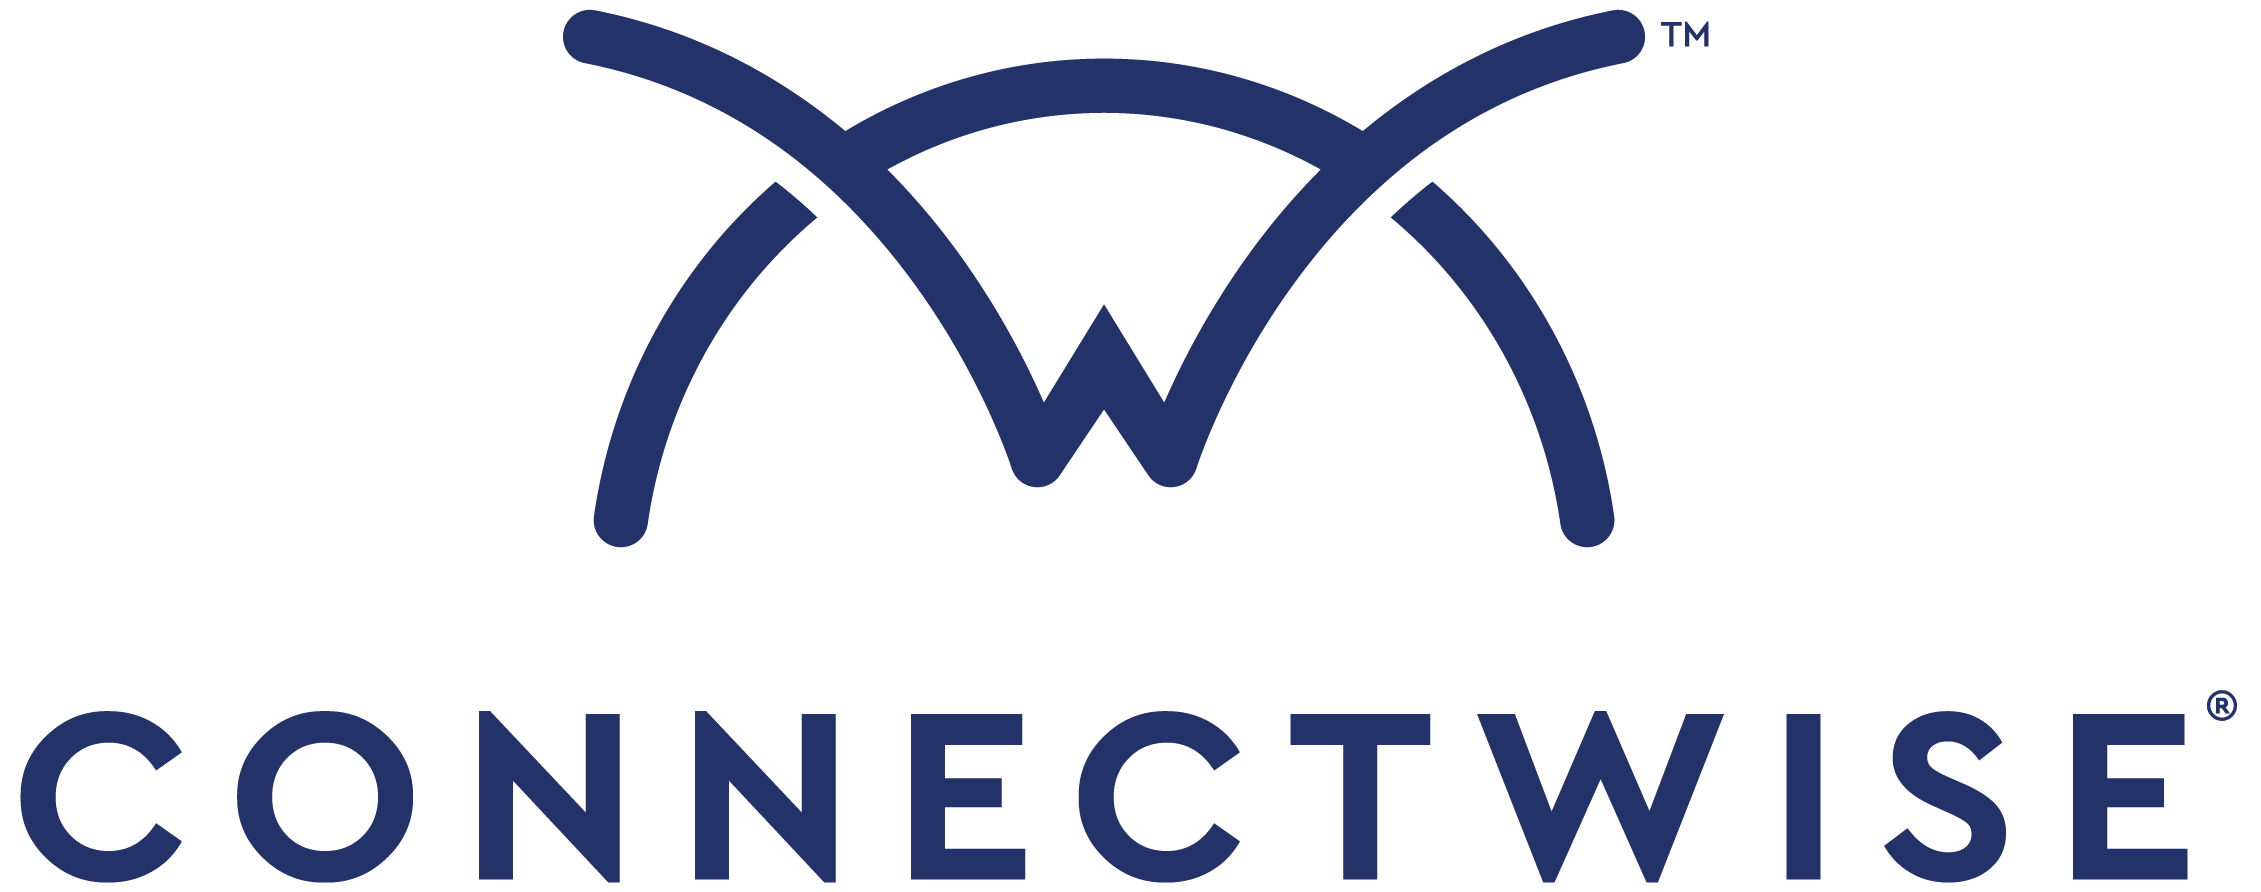 ConnectWise logo.